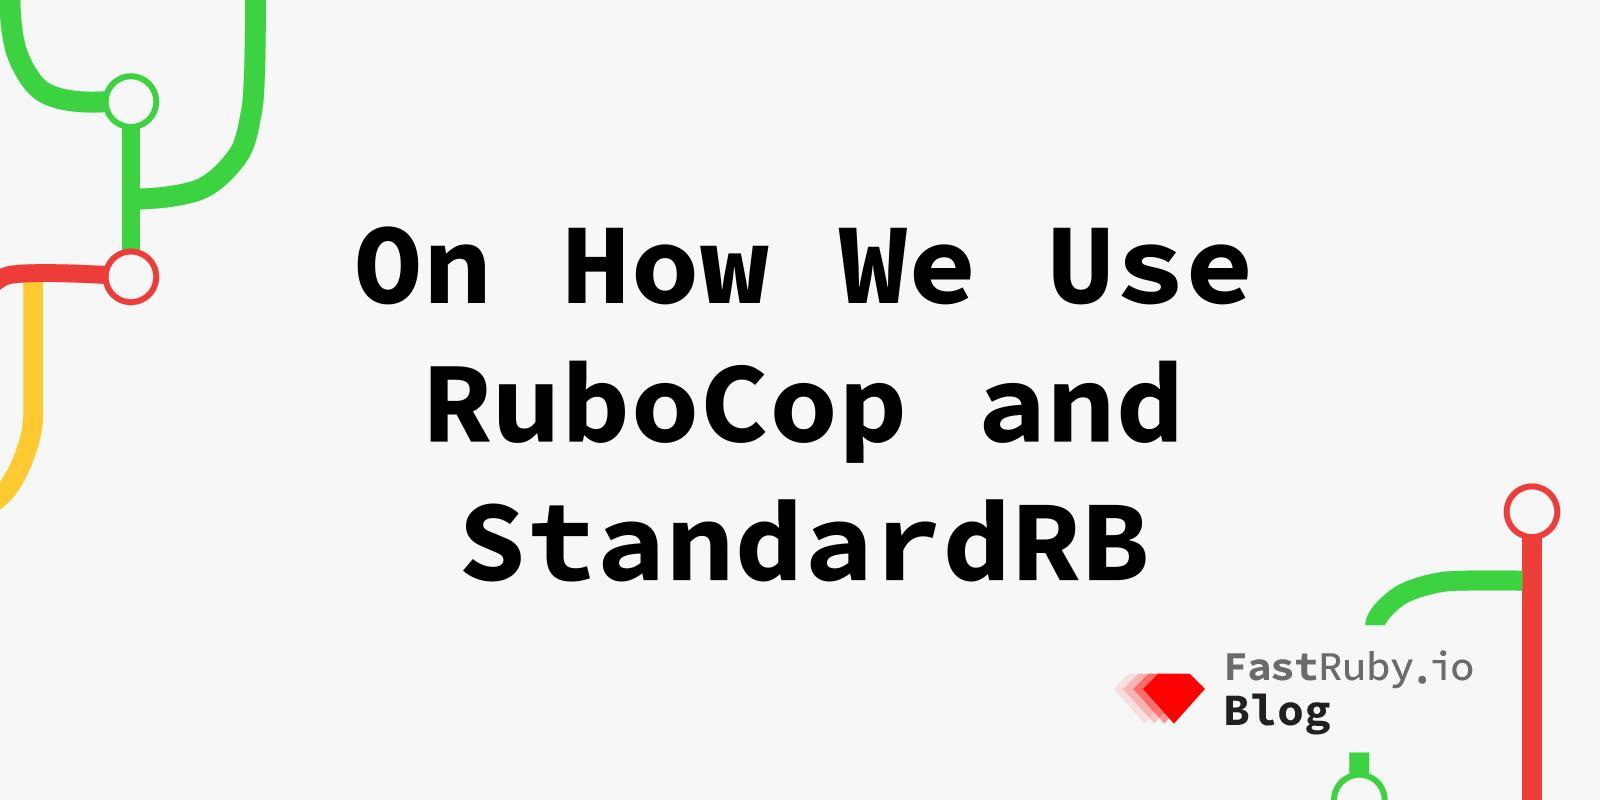 On How We Use RuboCop and StandardRB